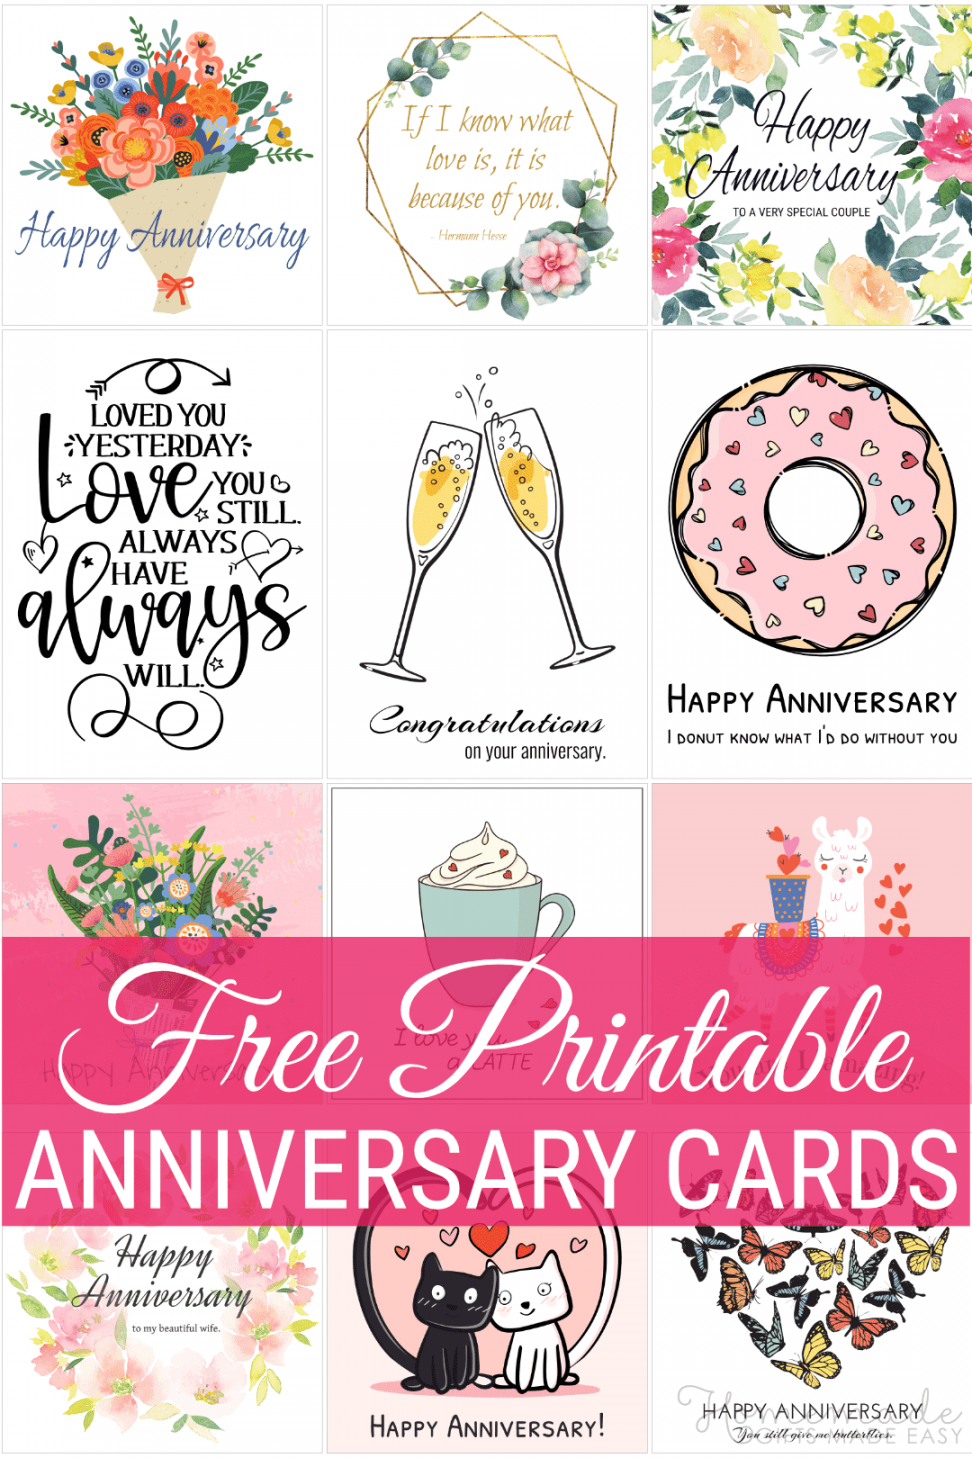 Free Printable Cards For All Occasions - Printable - Free Printable Cards for all Occasions